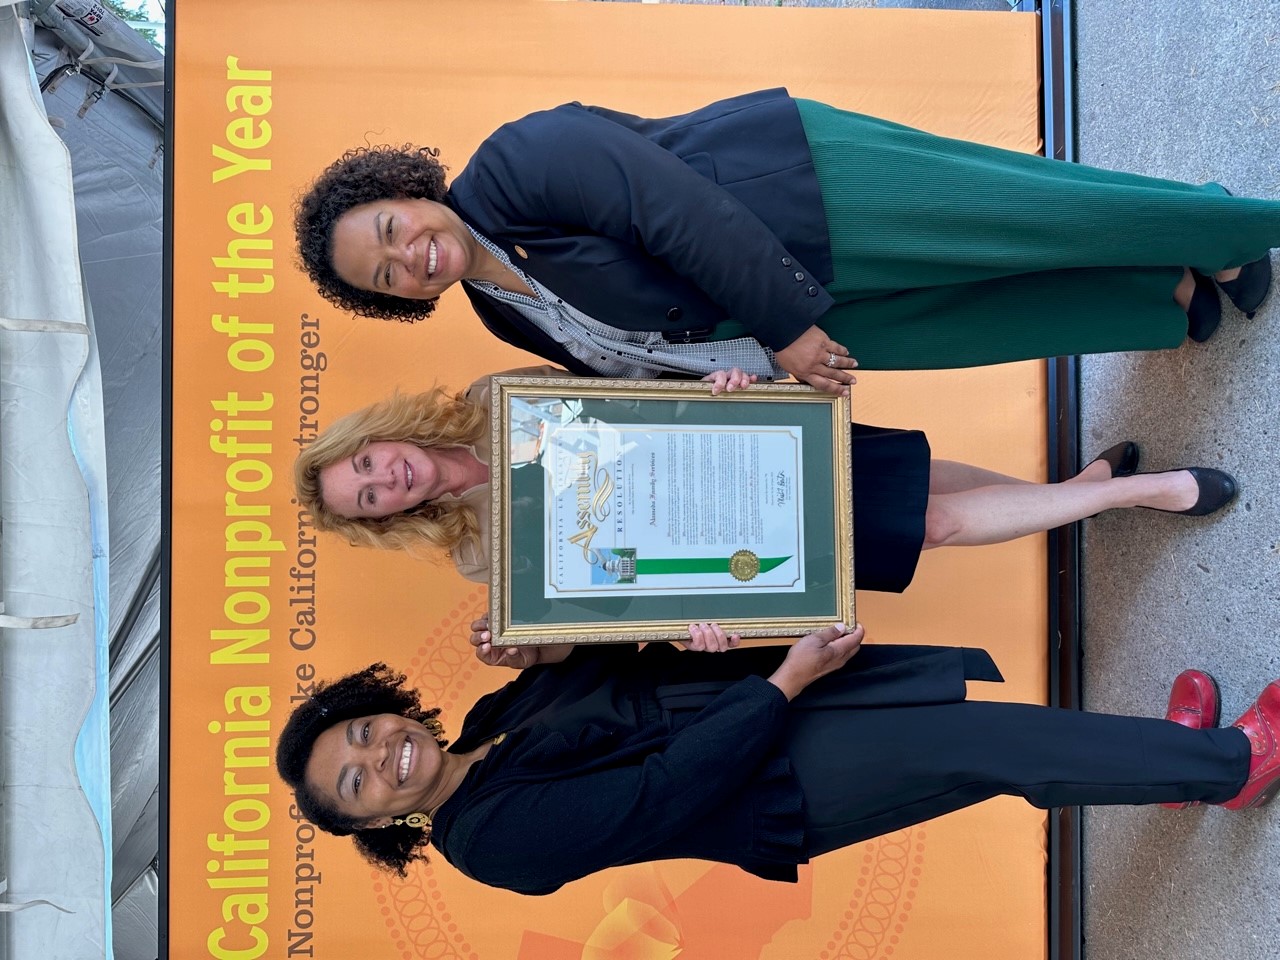 (from left to right) Yunia Rentería, Family Resource Center Supervisor with Alameda Family Services, Katherine Schwartz, Executive Director of Alameda Family Services, Assemblymember Mia Bonta